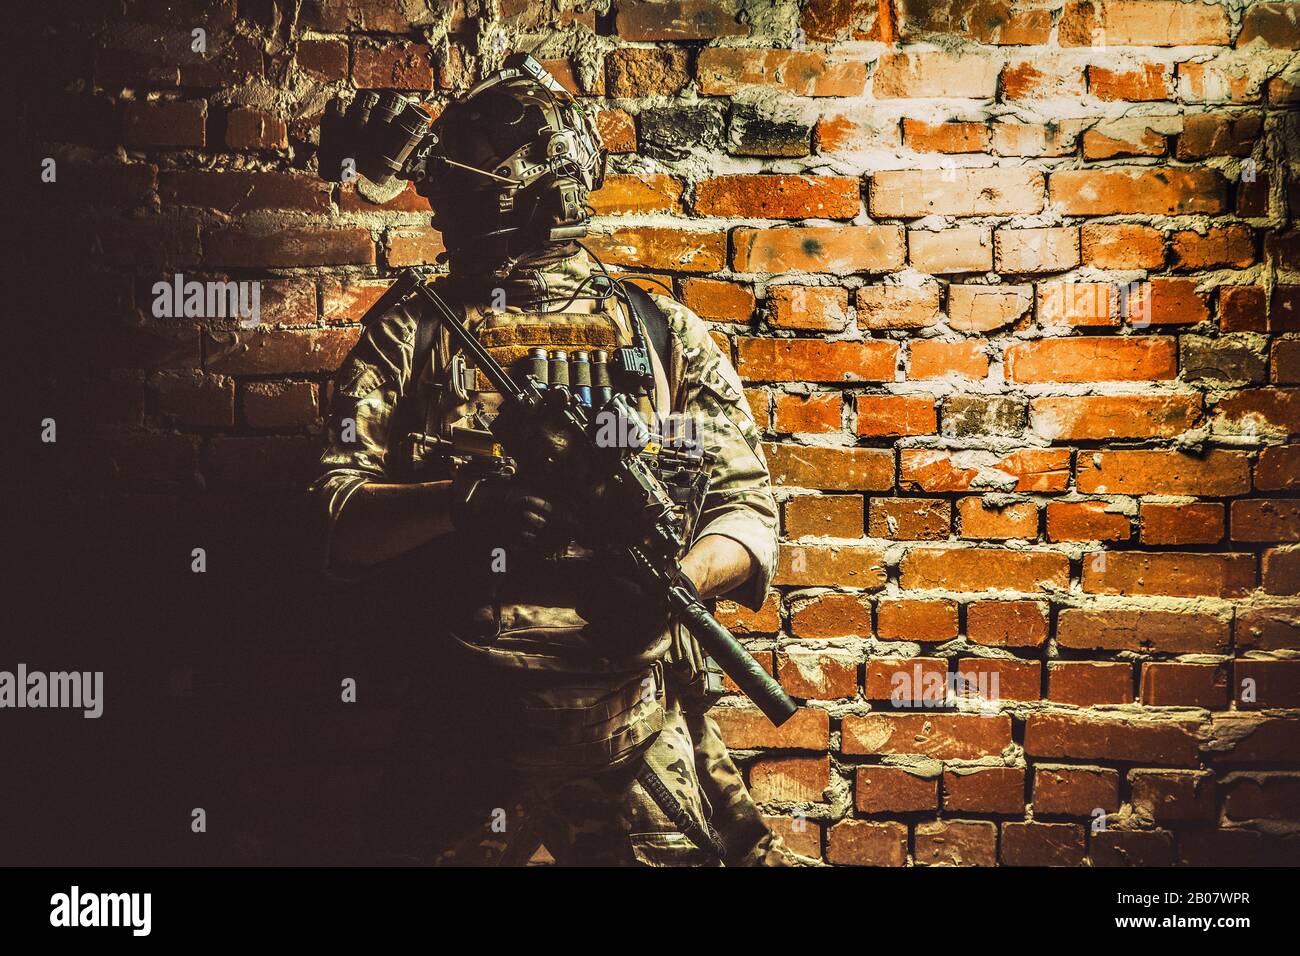 Special operations forces soldier, counter terrorism assault team fighter with night vision device on helmet and service rifle, low key indoor shot brick wall Stock Photo